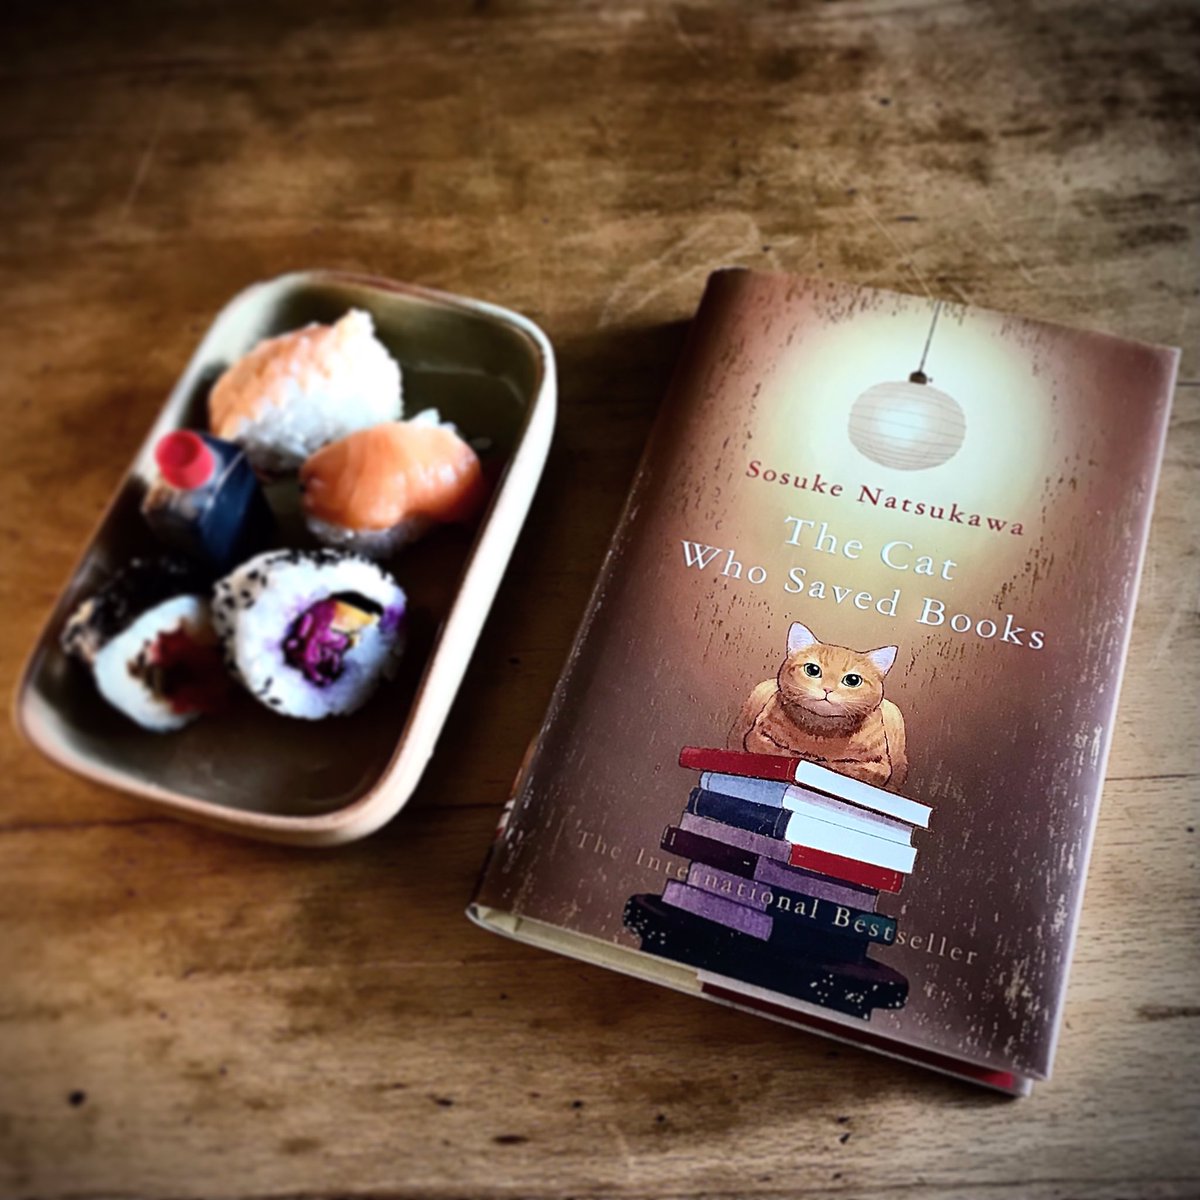 In need of a charming & whimsical read?
I’ll point you in the direction of #TheCatWhoSavedBooks (aided by an introverted high school student) by #SosukeNatsukawa - contemplating why we love books and how we express it.  Definitely food for thought!
Tr: Louise Heal Kawai
Gifted